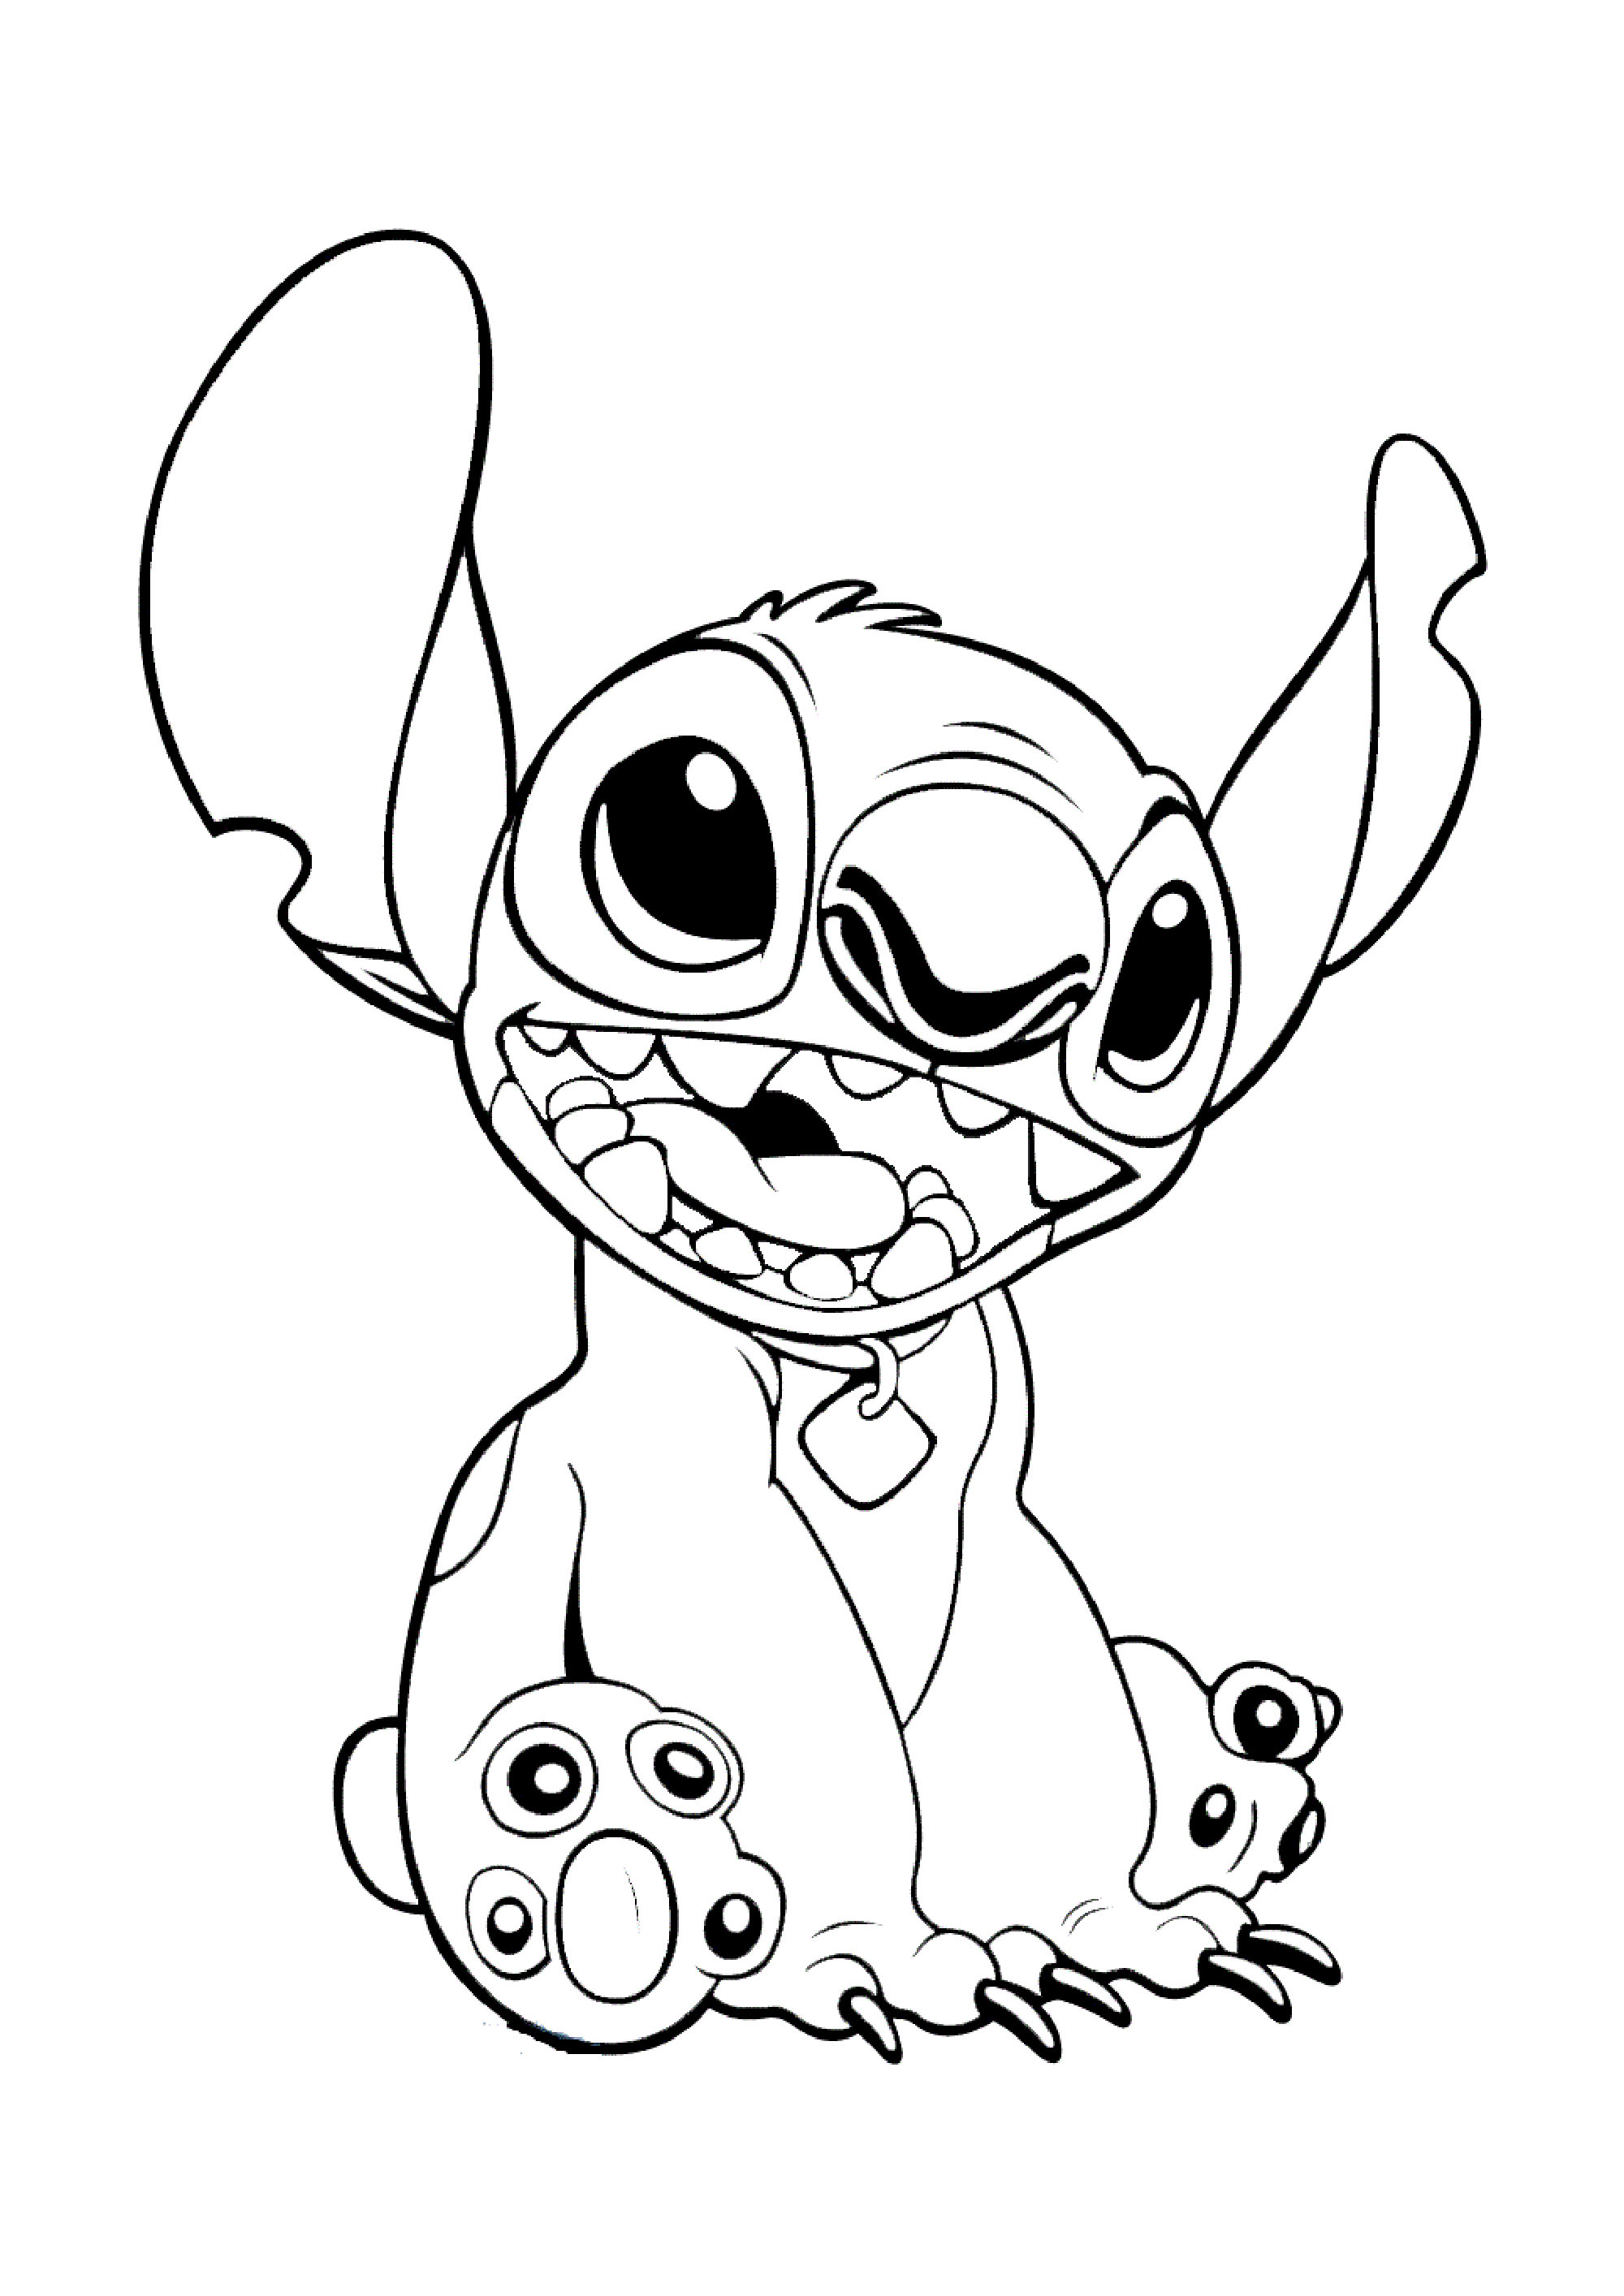 Lilo and Stitch coloring pages to print for children - Lilo and Stitch Kids Coloring  Pages